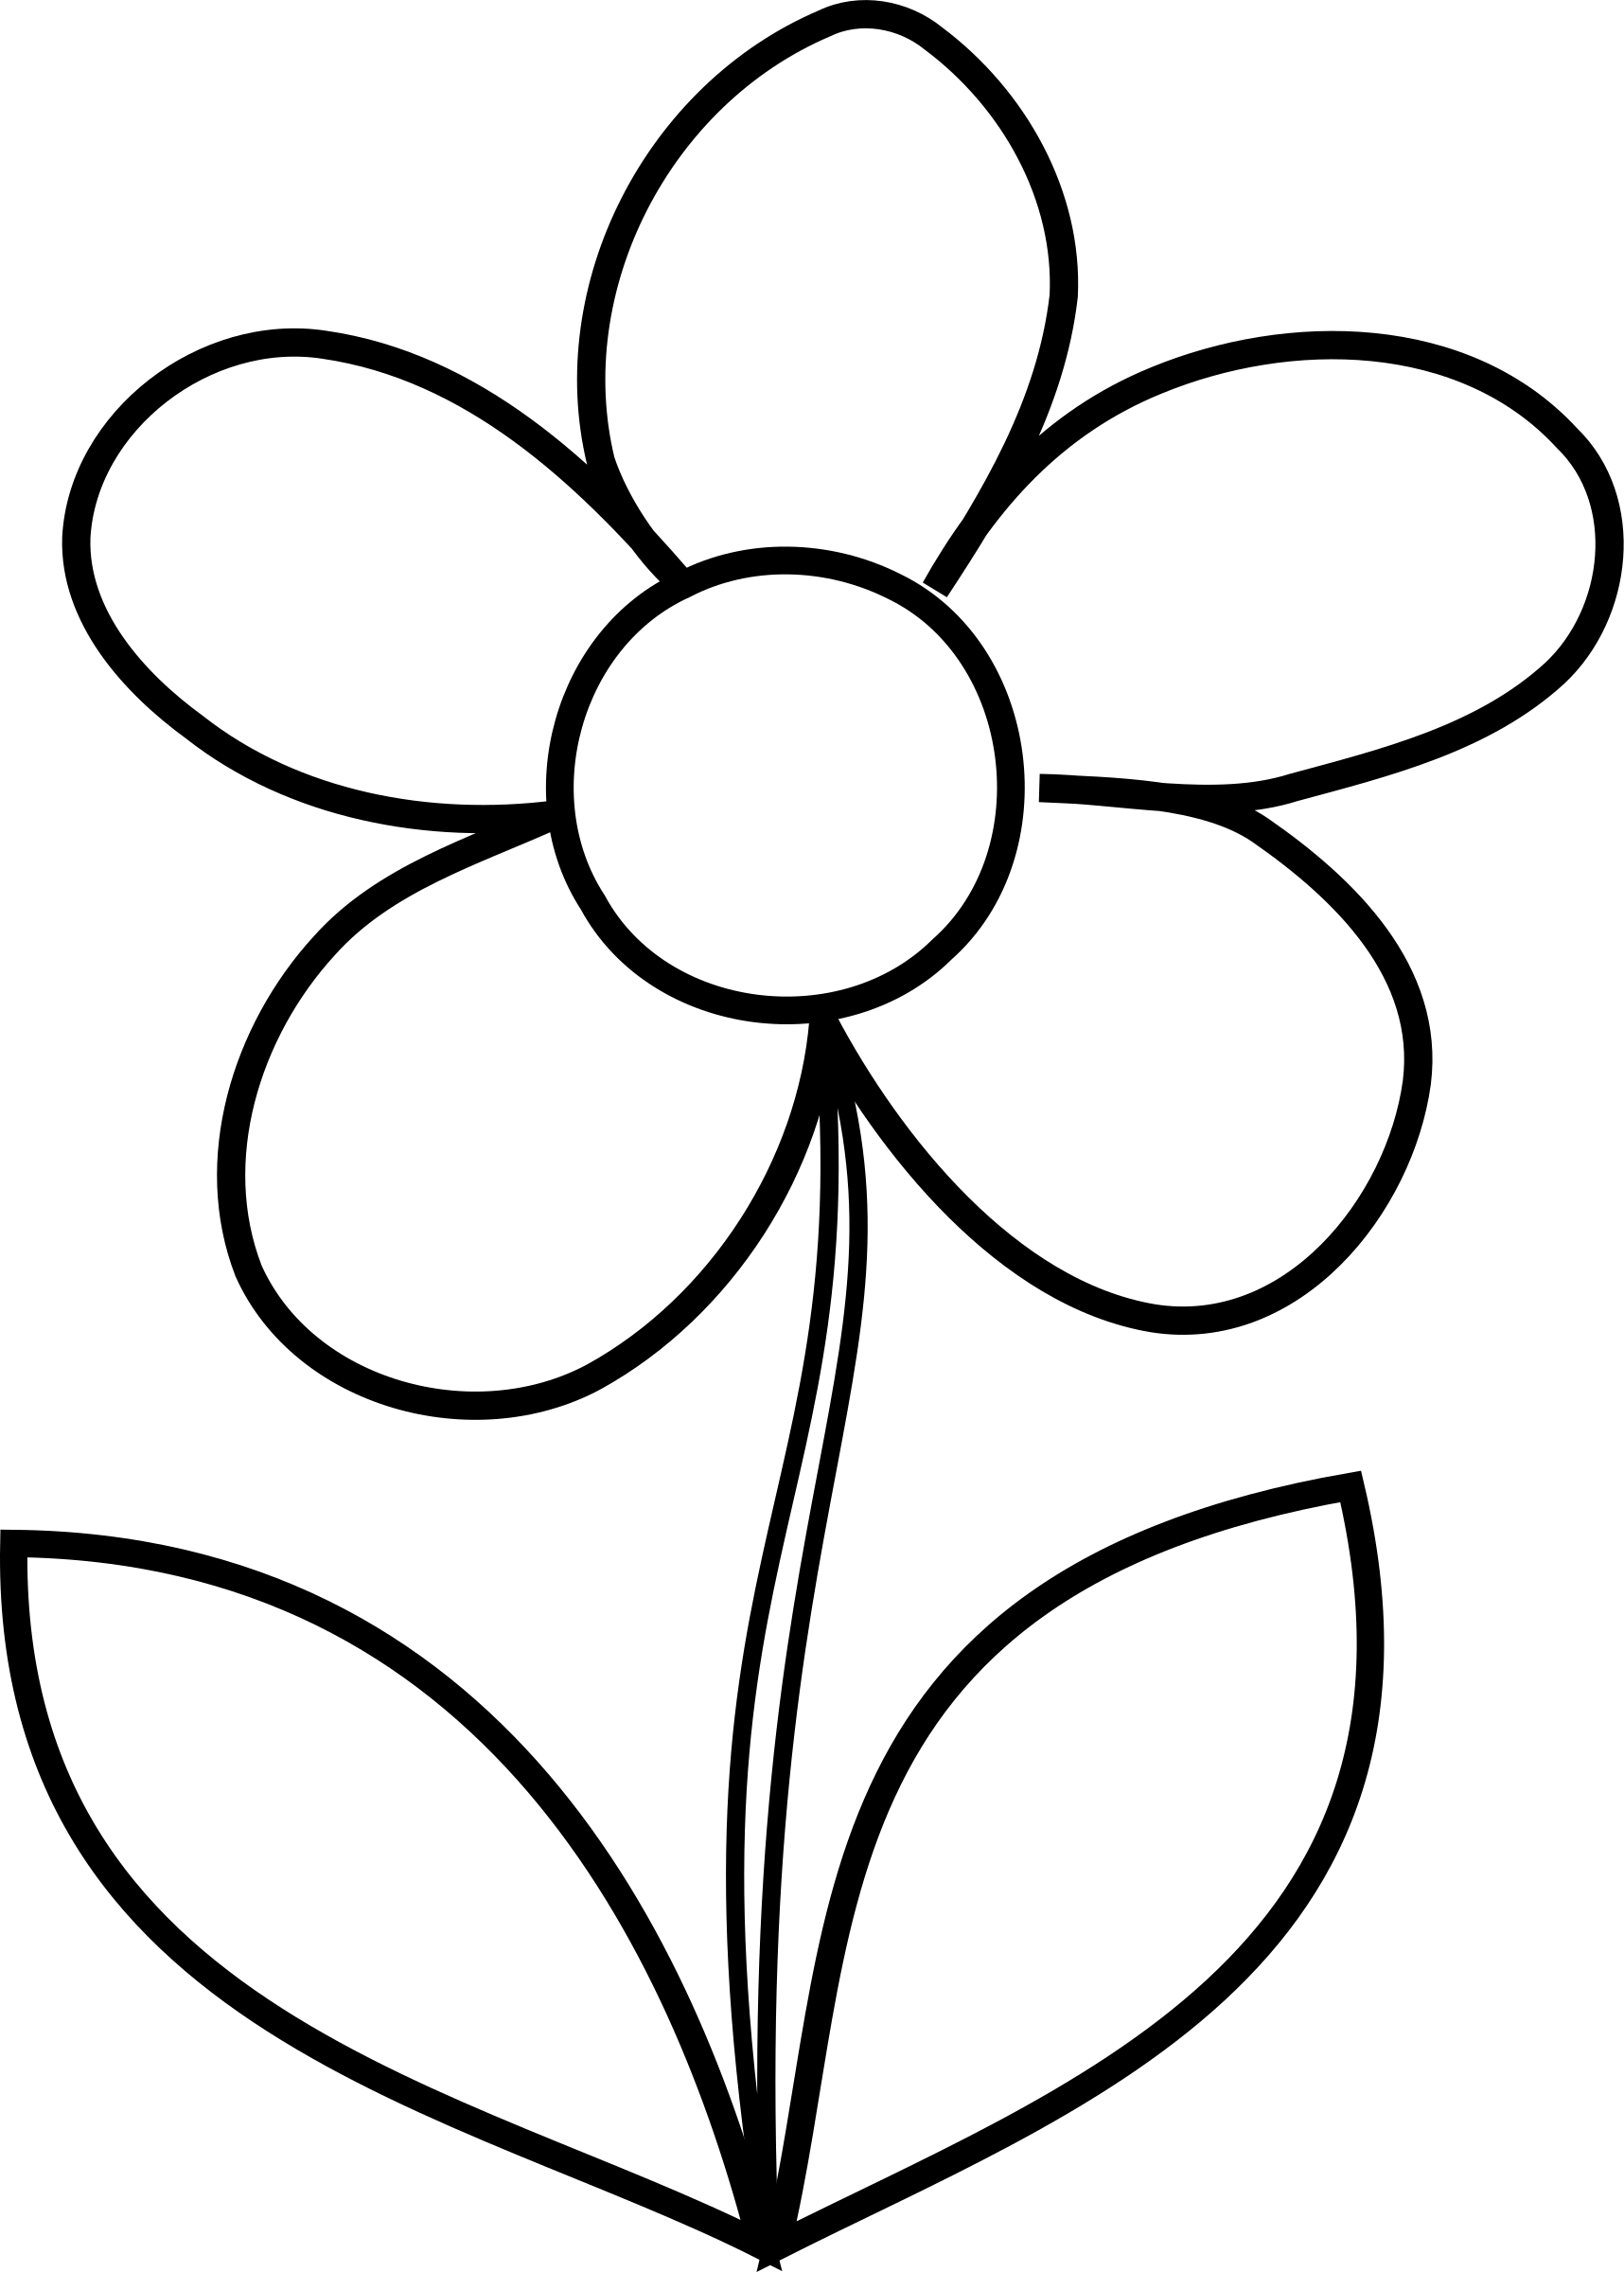 Clipart Simple Flower bw